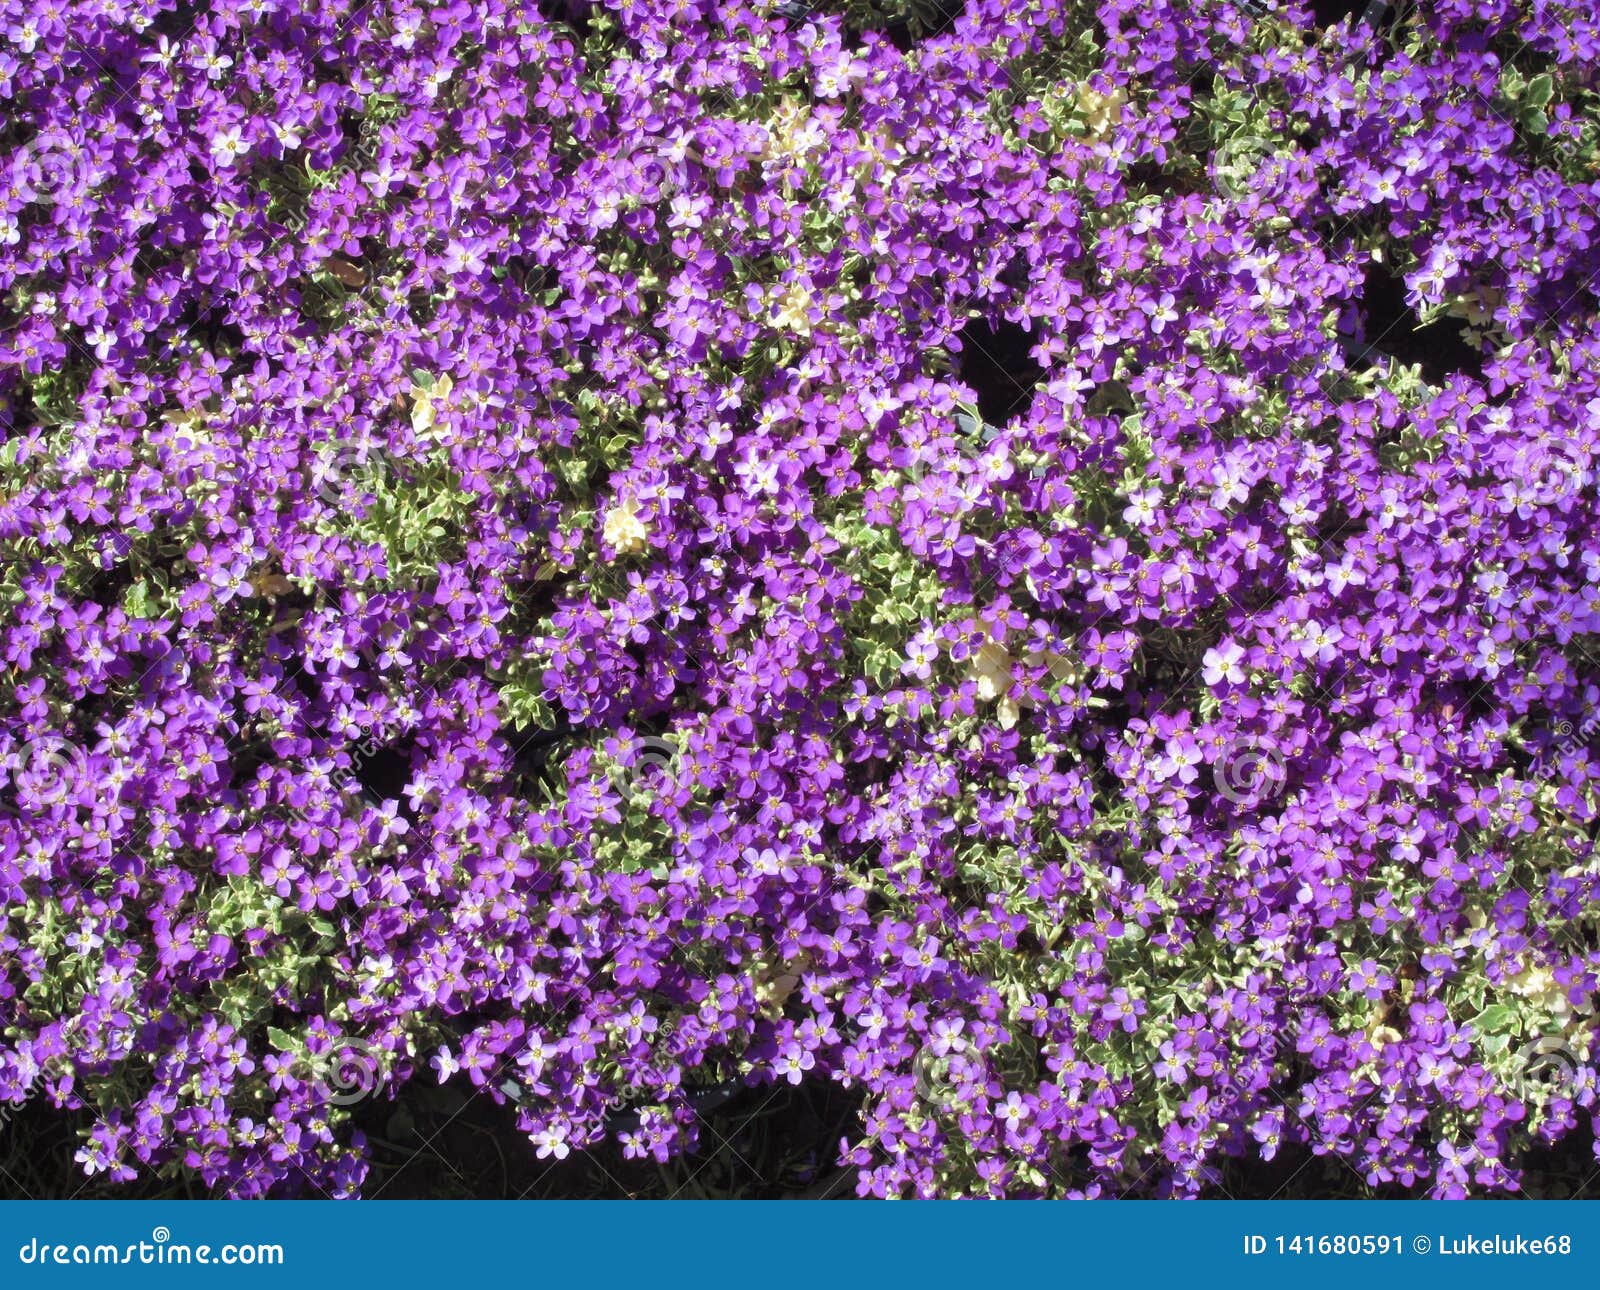 Natural Background Of Purple Spring Flowers Stock Image - Image of ...